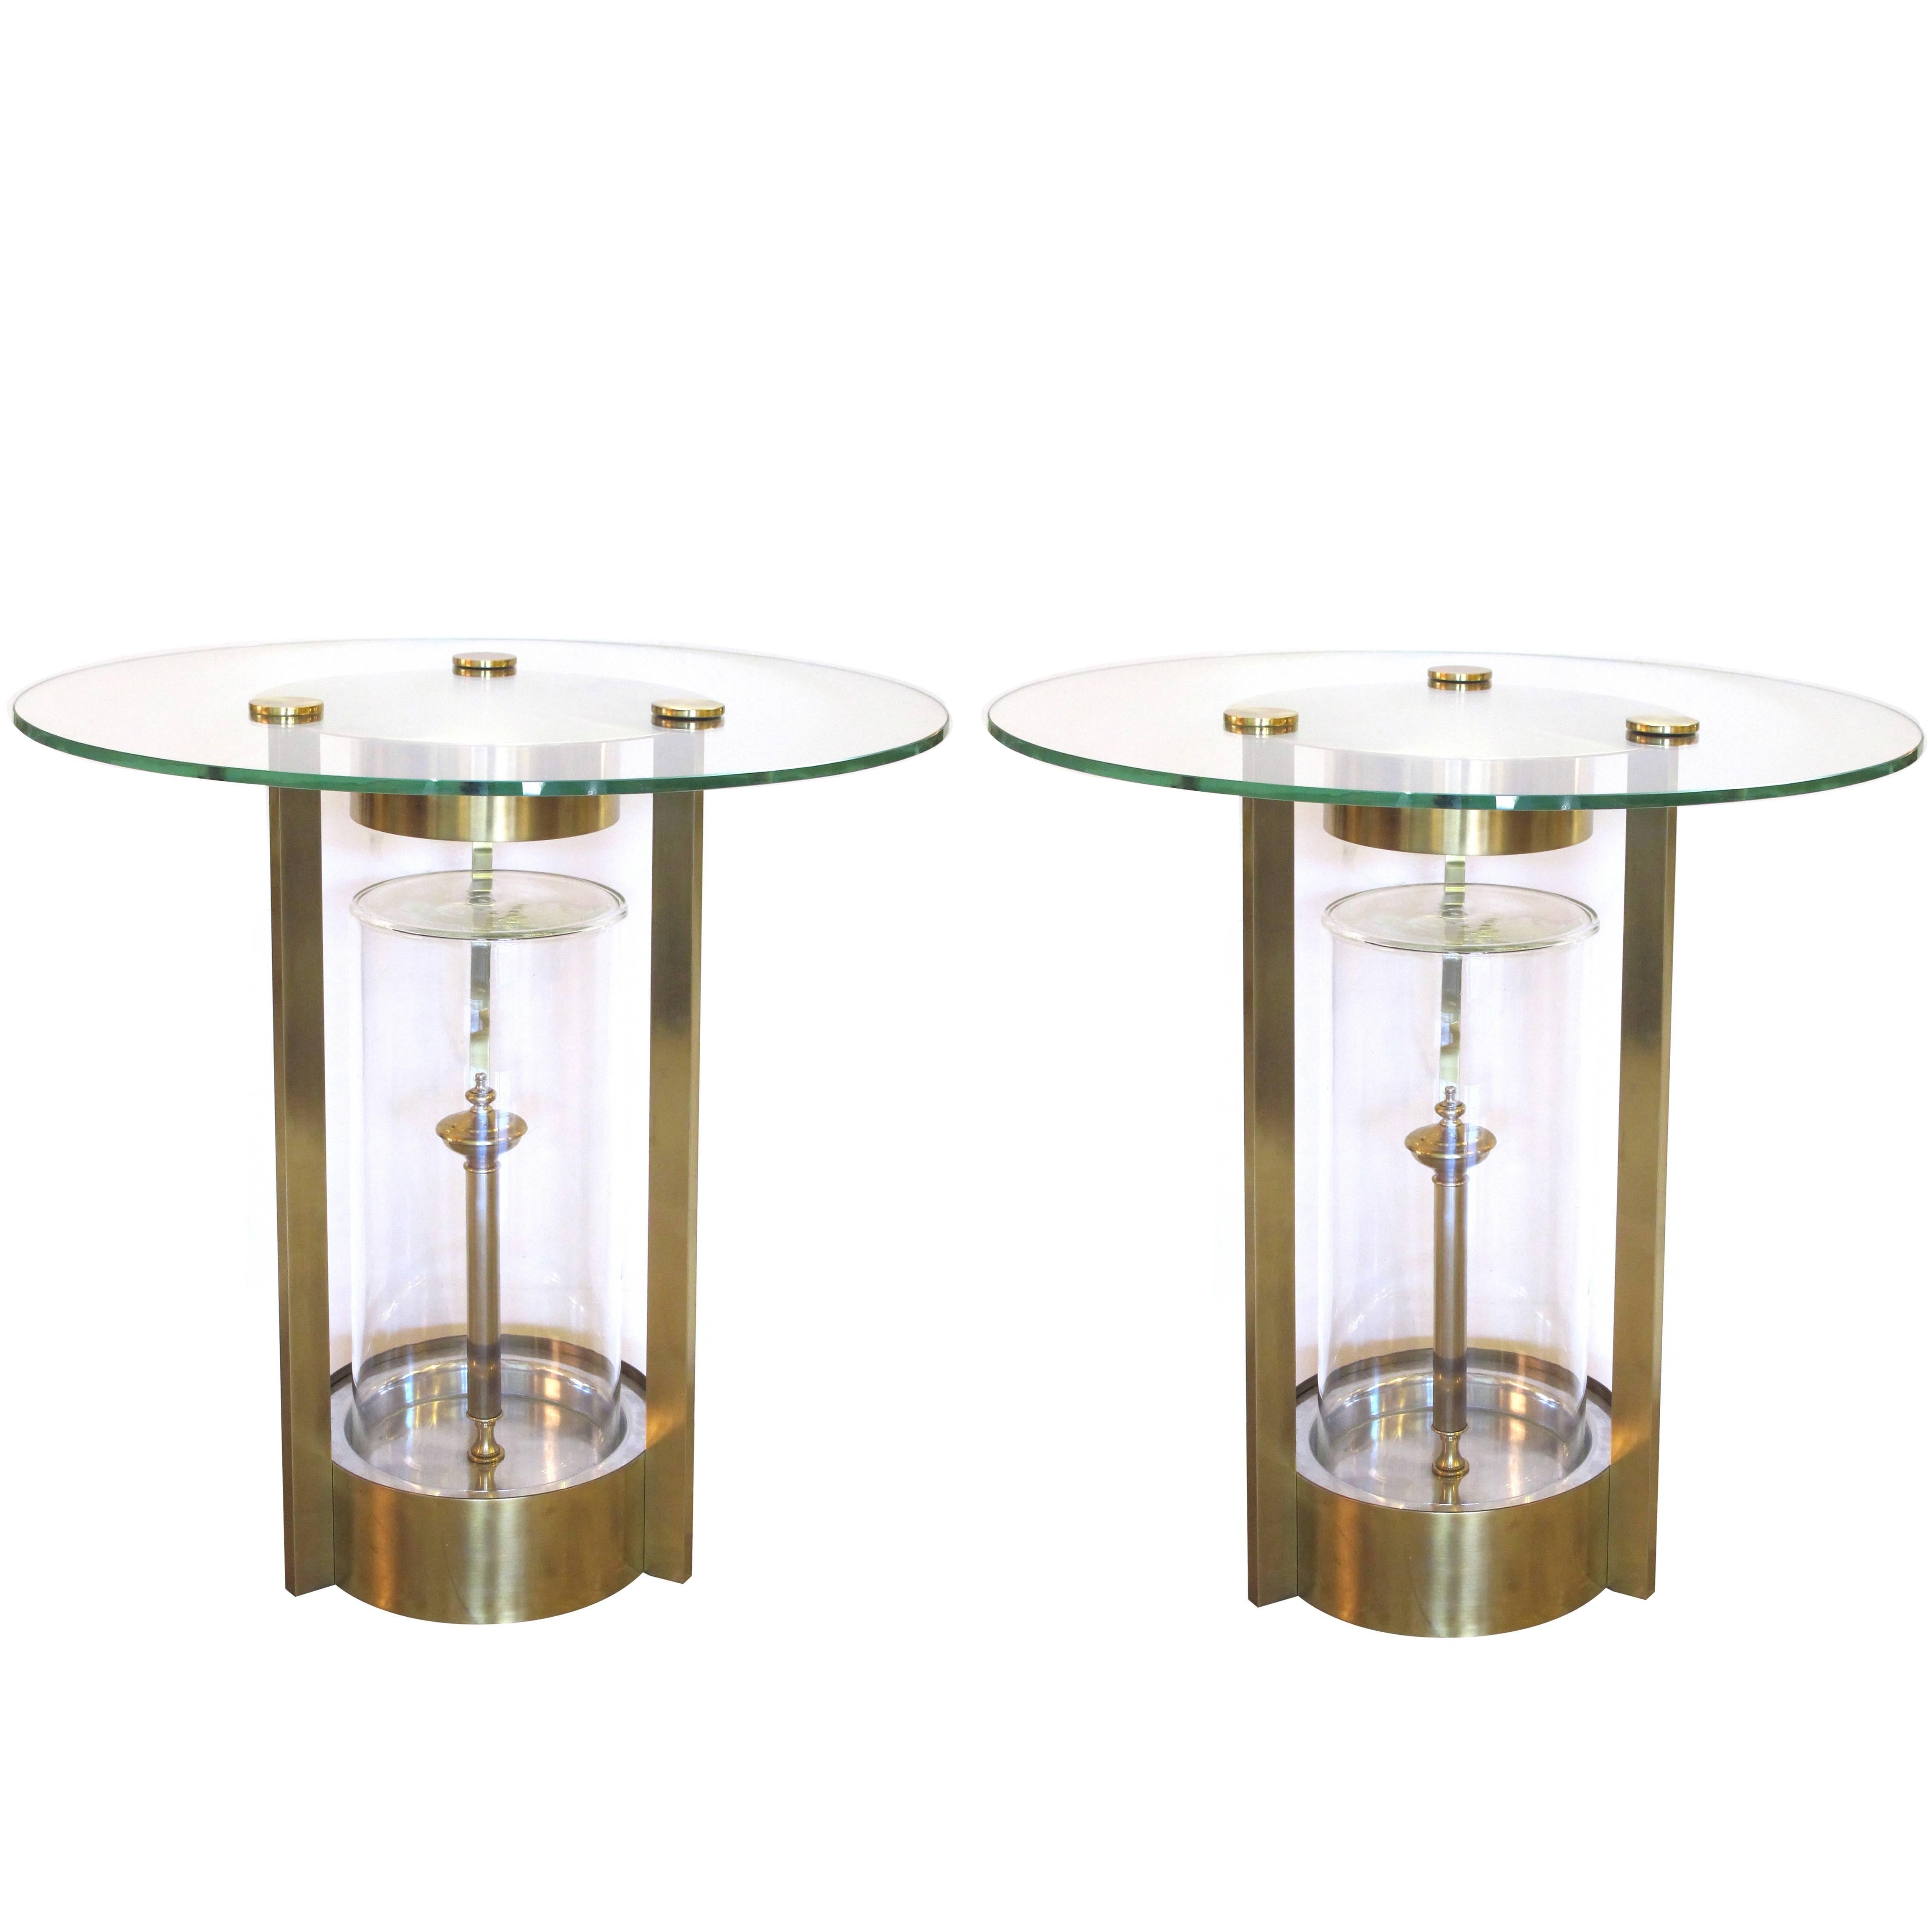 Rare Pair of American Illuminated Side Tables, Designed by Dorothy Thorpe